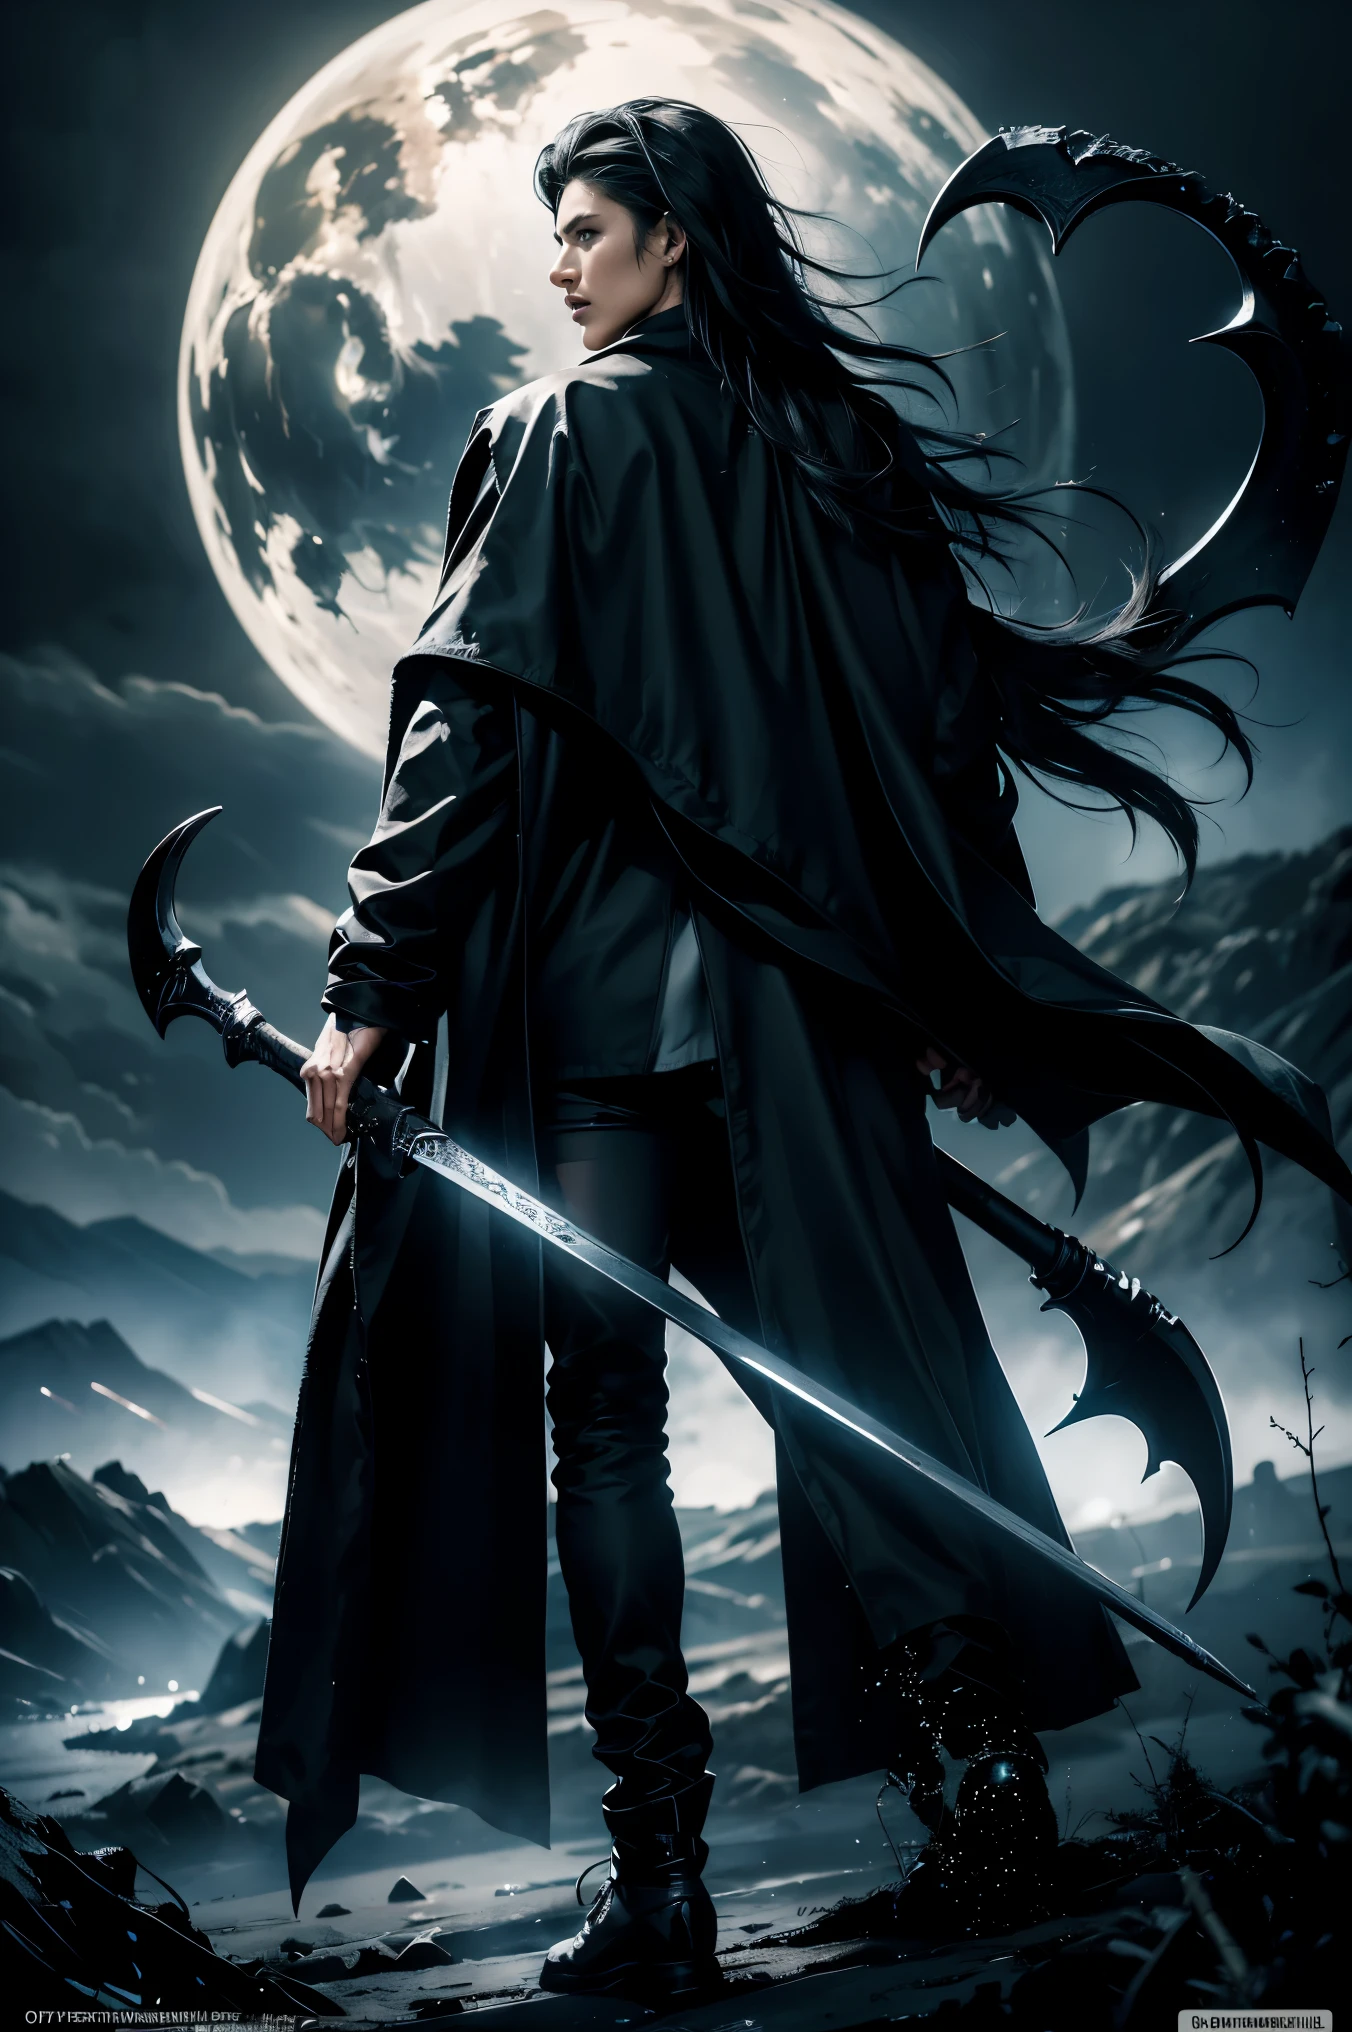 ((masterpiece, highest quality, Highest image quality, High resolution, photorealistic, Raw photo, 8K)), ((Extremely detailed CG unified 8k wallpaper)), Black Grim Reaper, arafed grim with scythe in the dark with a scythe in his hand, grim reaper, man with scythe, the grim reaper, holding a scythe, reminded me of the grim reaper, portrait of grim reaper, back view of the grim reaper, reaper of night!!!!, the reaper, the harbringer of death, the reaper as a scary, 